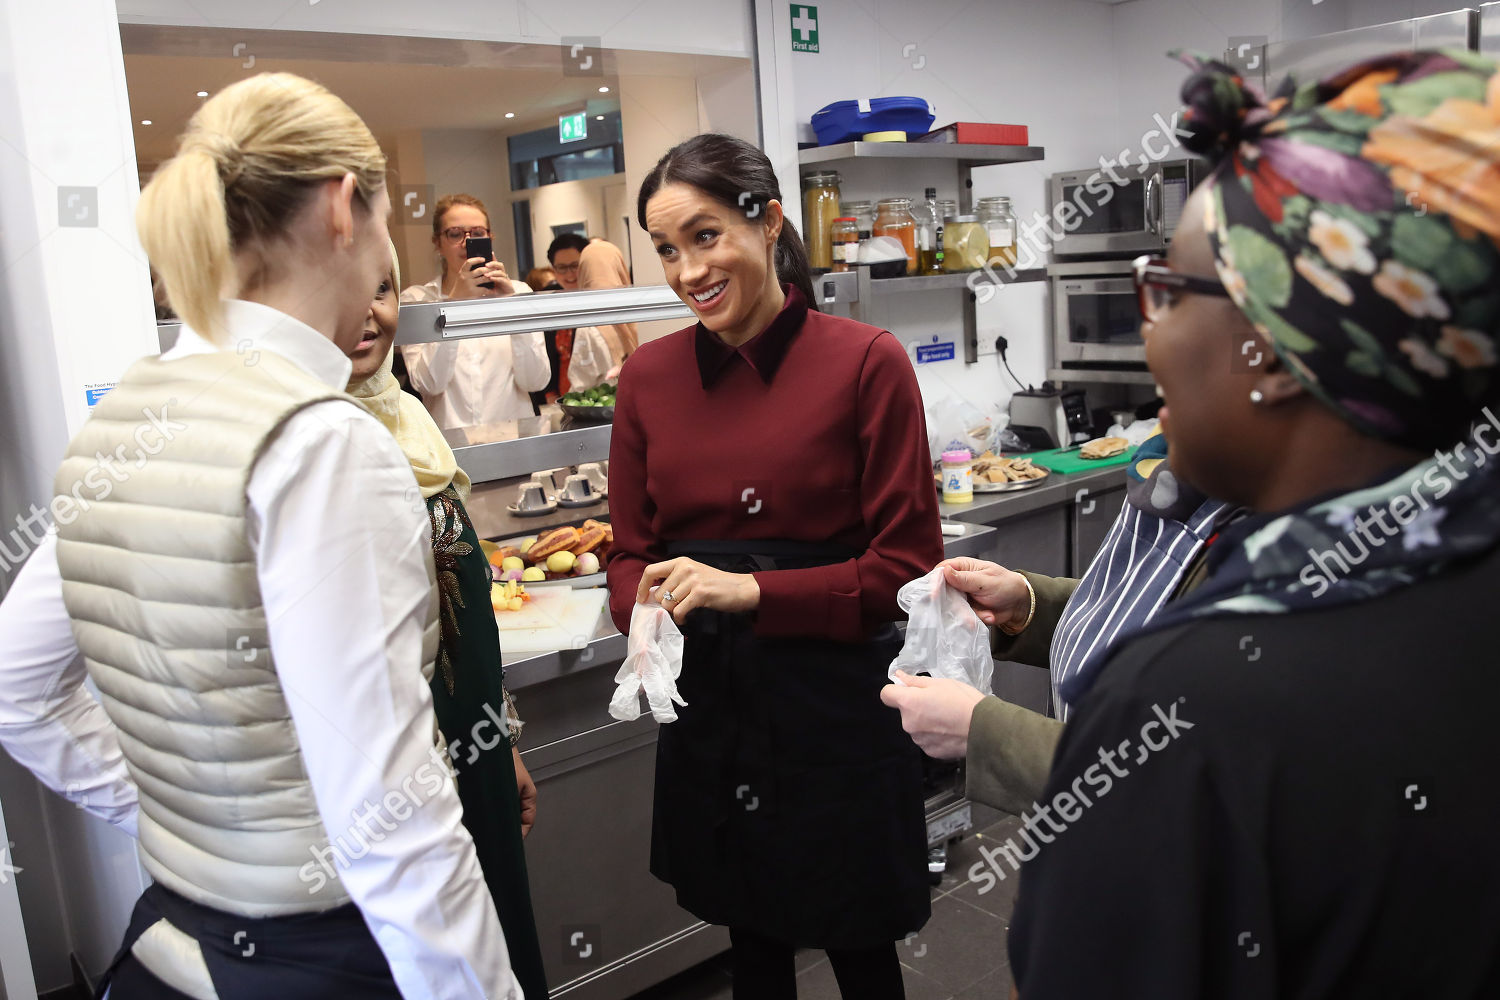 meghan-duchess-of-sussex-visit-to-the-hubb-community-kitchen-london-uk-shutterstock-editorial-9988987o.jpg